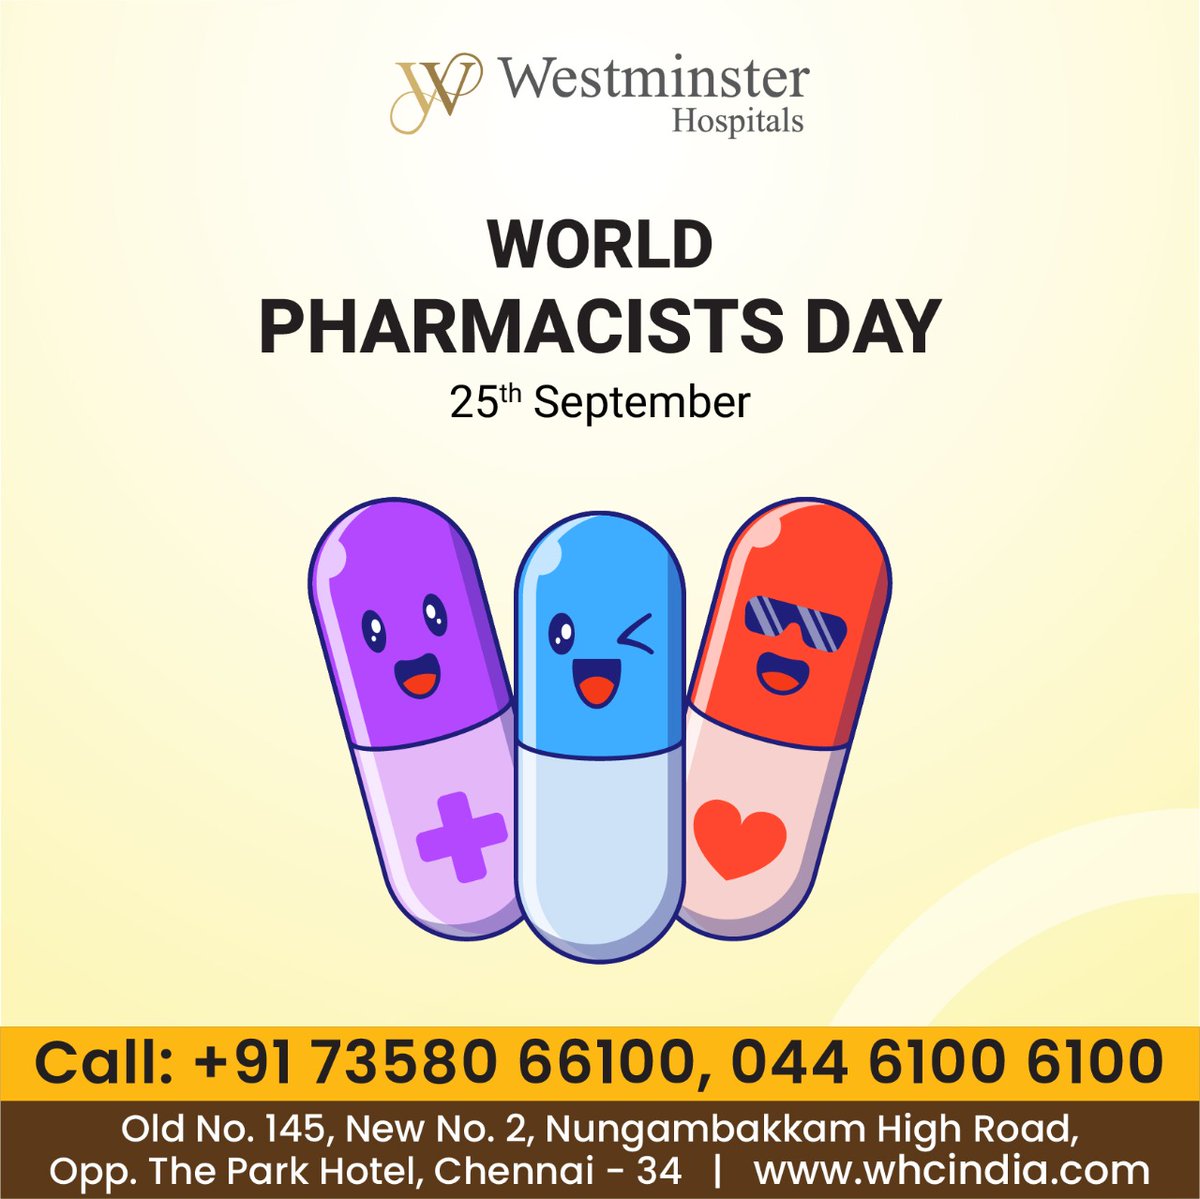 At Westminster Hospital Pharmacy We ensure access to medicines and their appropriate use, improve adherence, coordinate care transitions and much more. #plasticsurgery #cosmetology  #dentistry  #gynaecology #dermatology #ophthalmology #preventivehealthcare #familymedicine